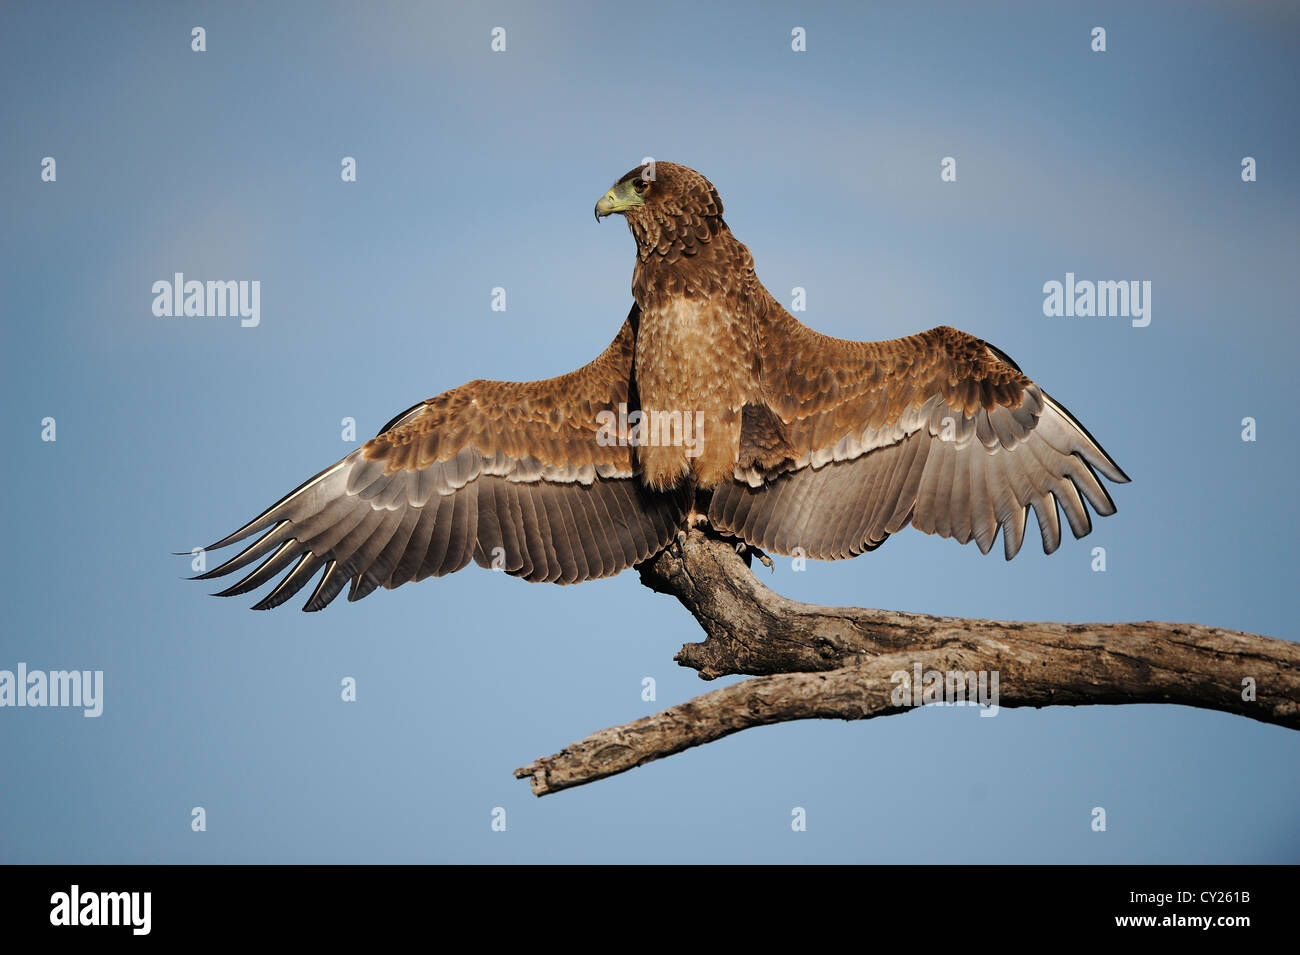 Eagle resting on a tree branch with its wings spread, Ndutu, Tanzania Stock Photo